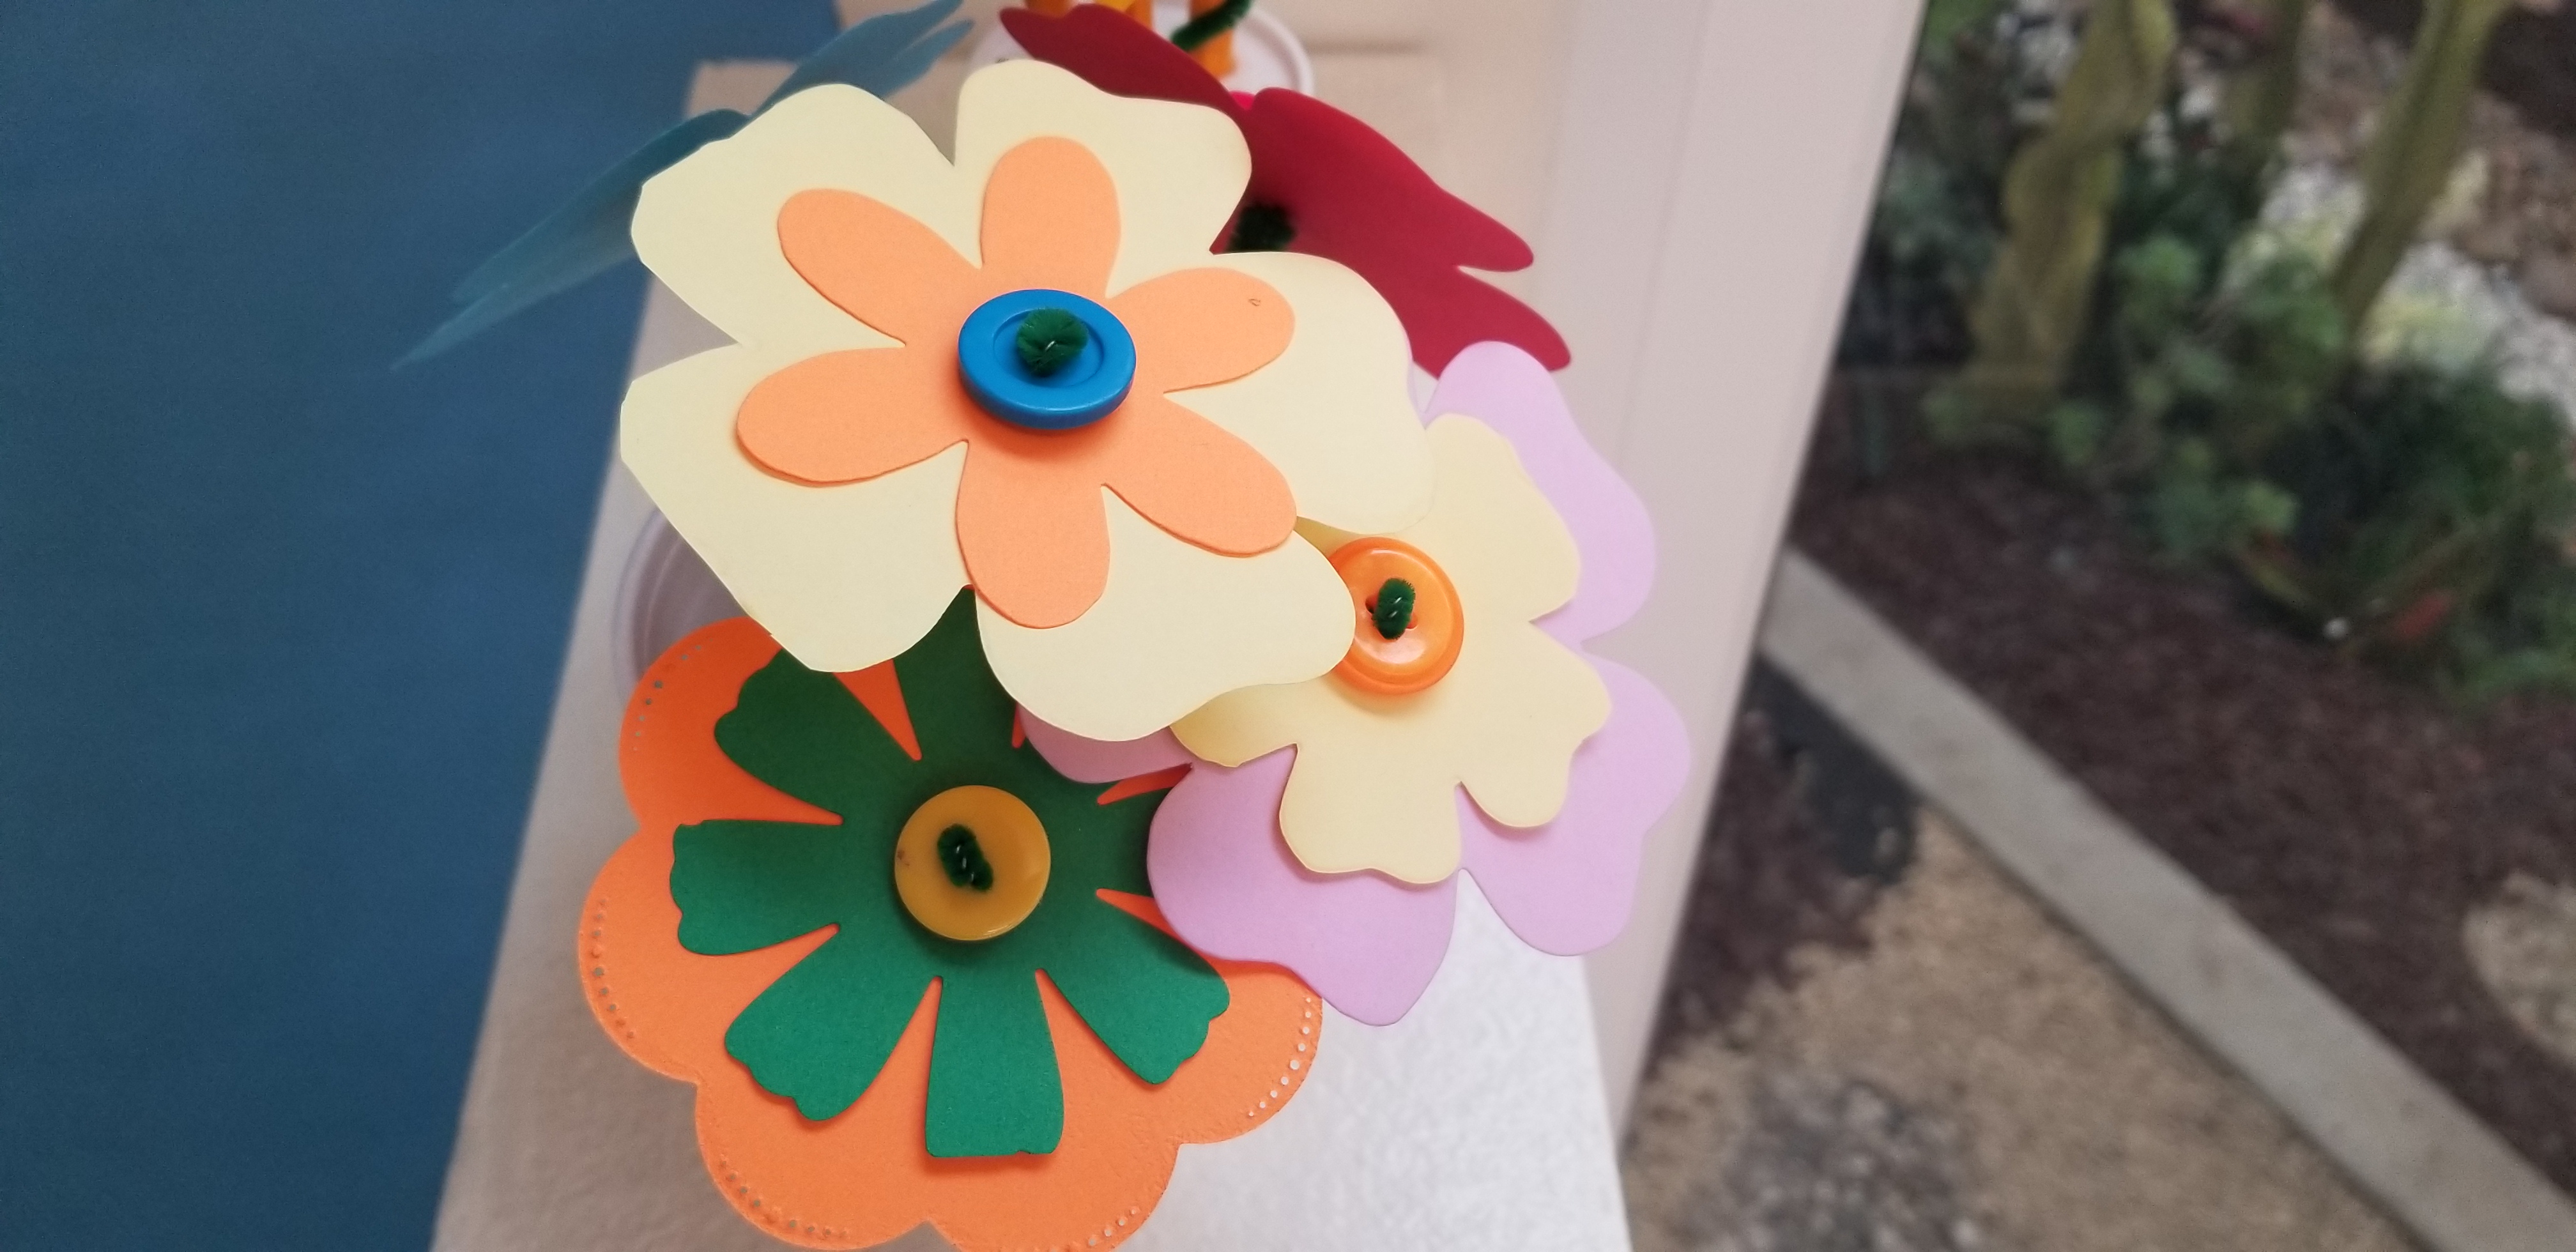 Handmade flowers in a variety of colors